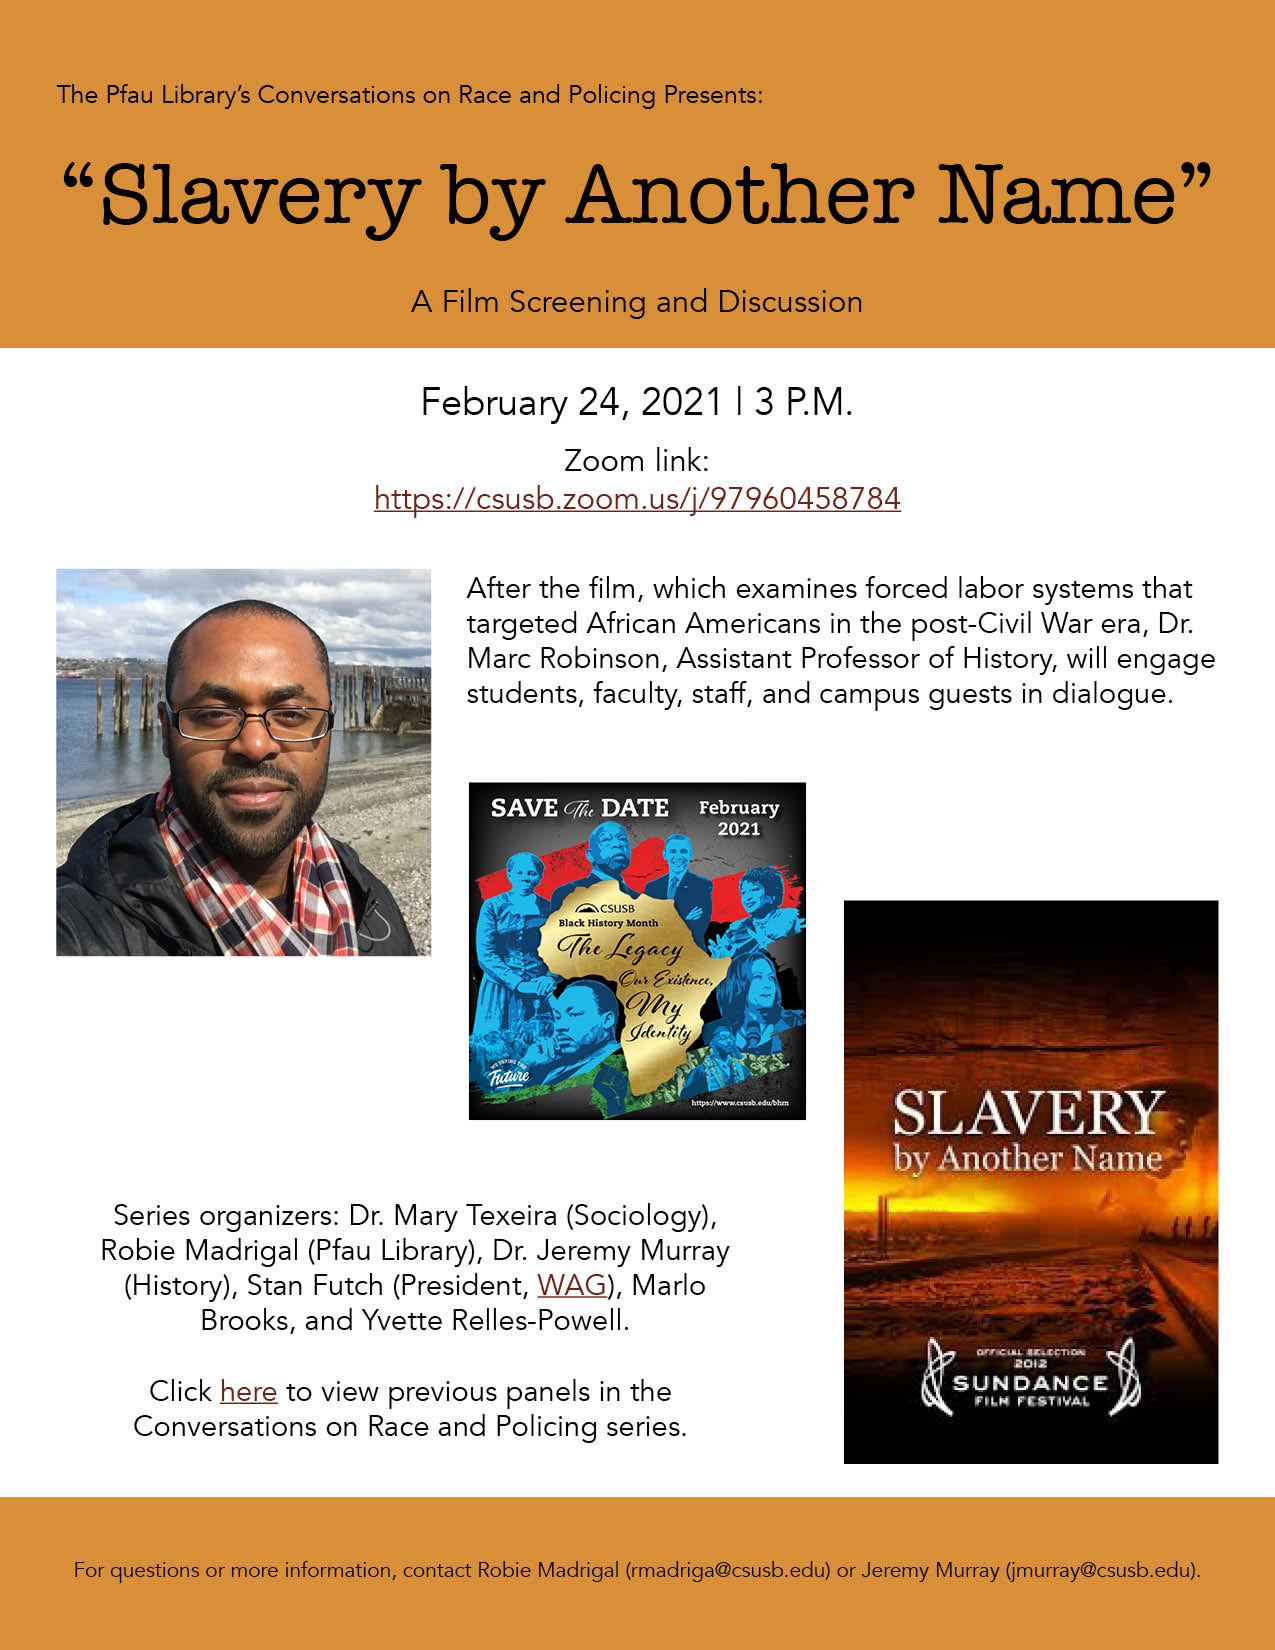 Slavery by another name flyer